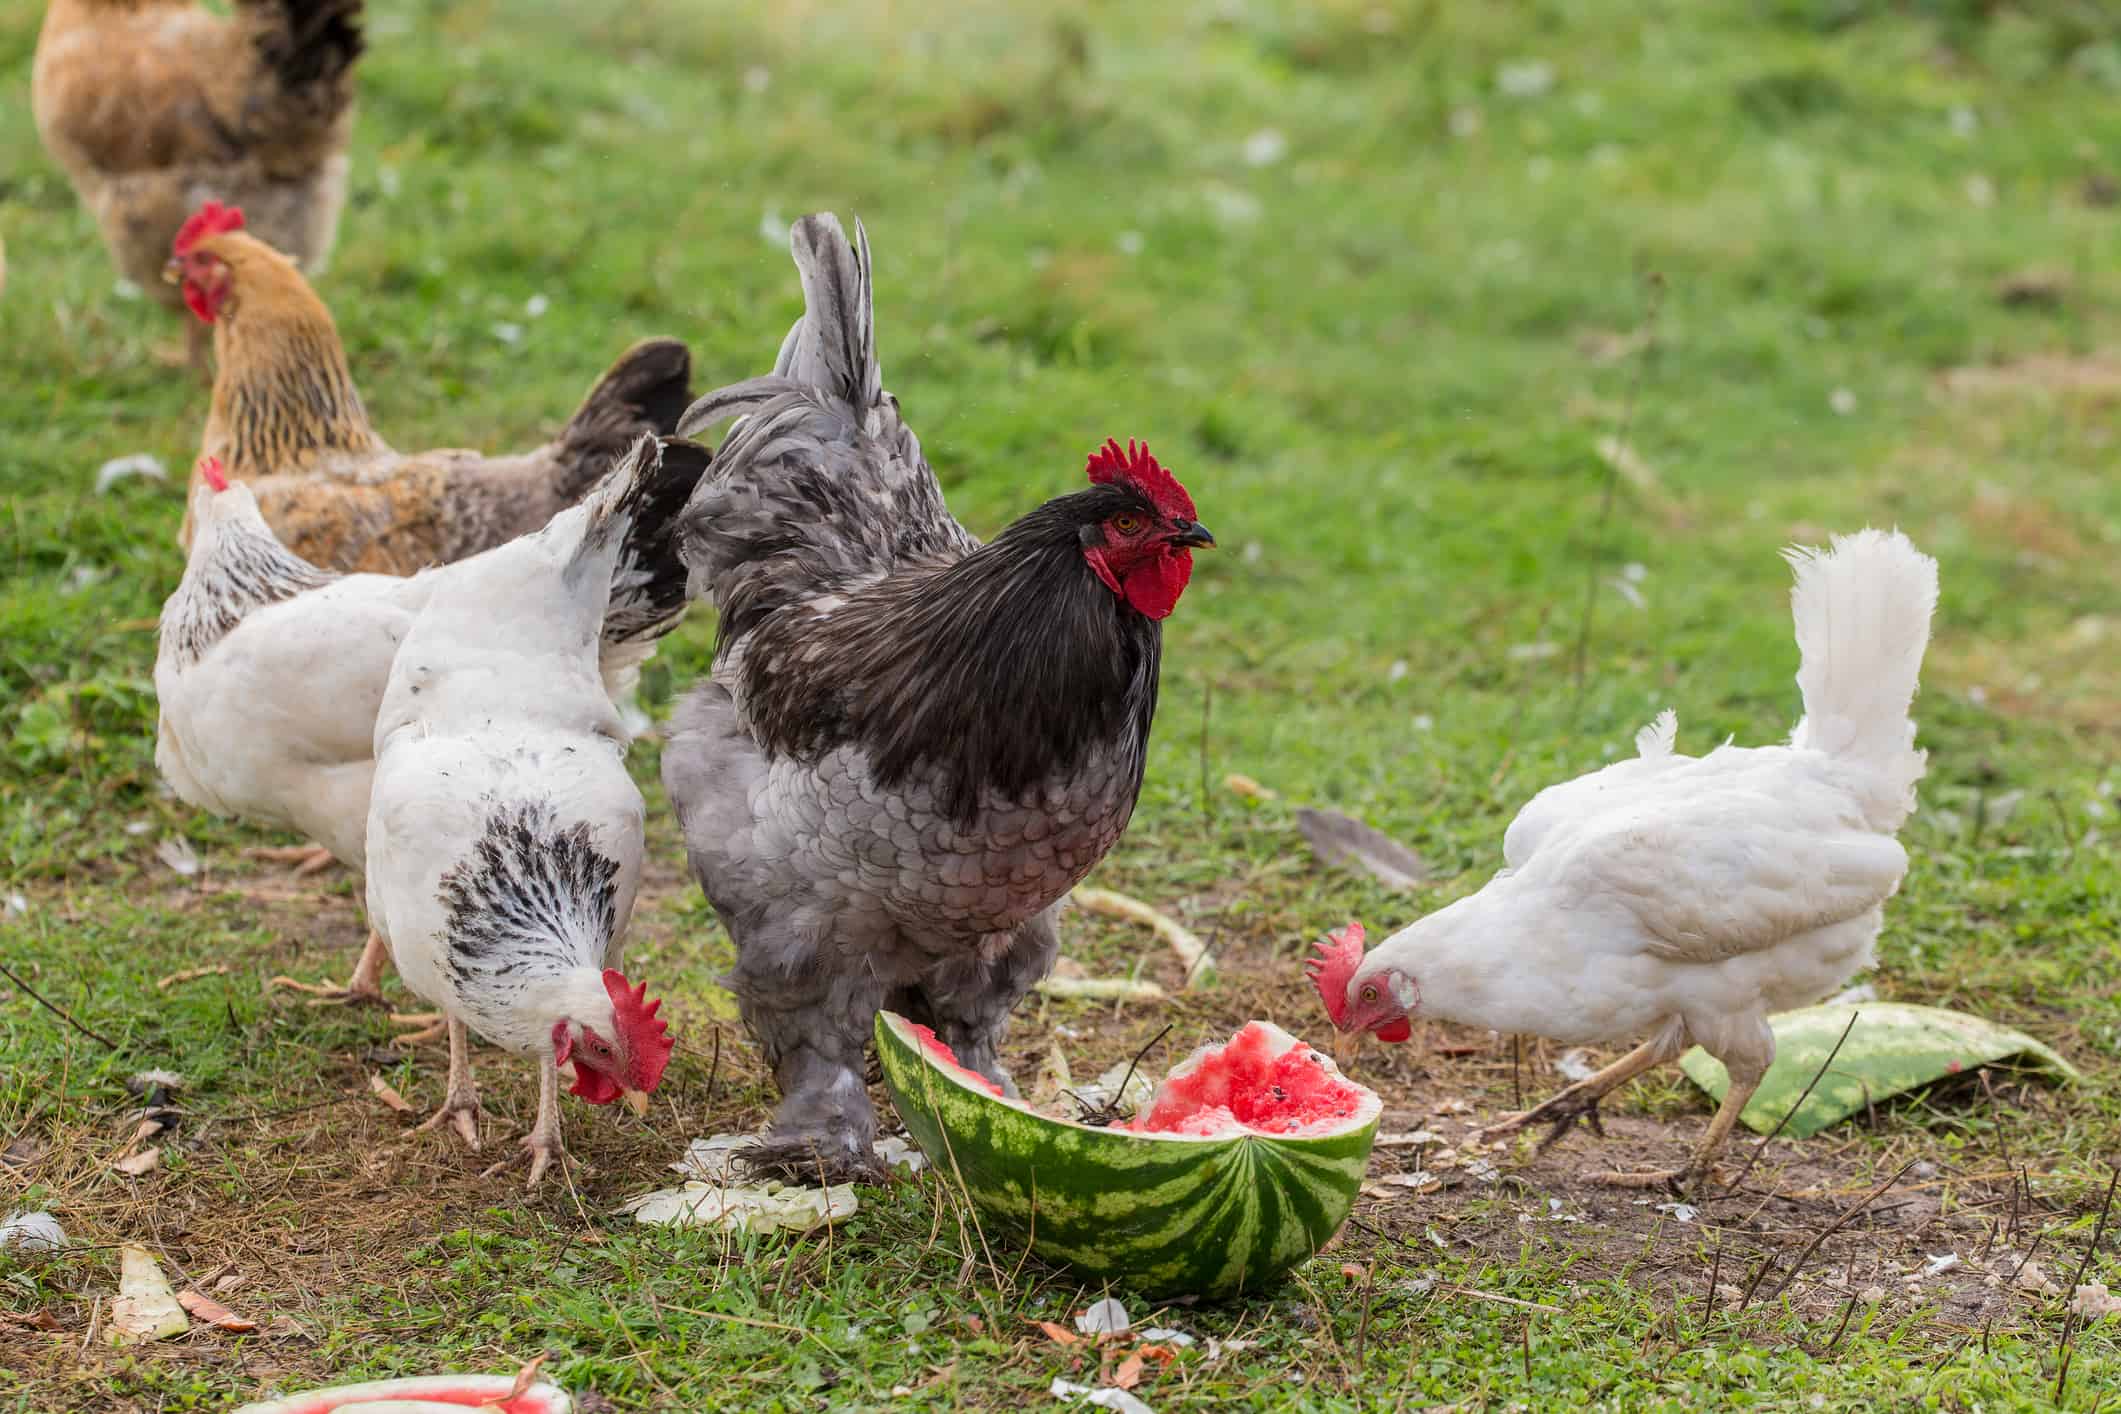 hen and rooster eating watermelon